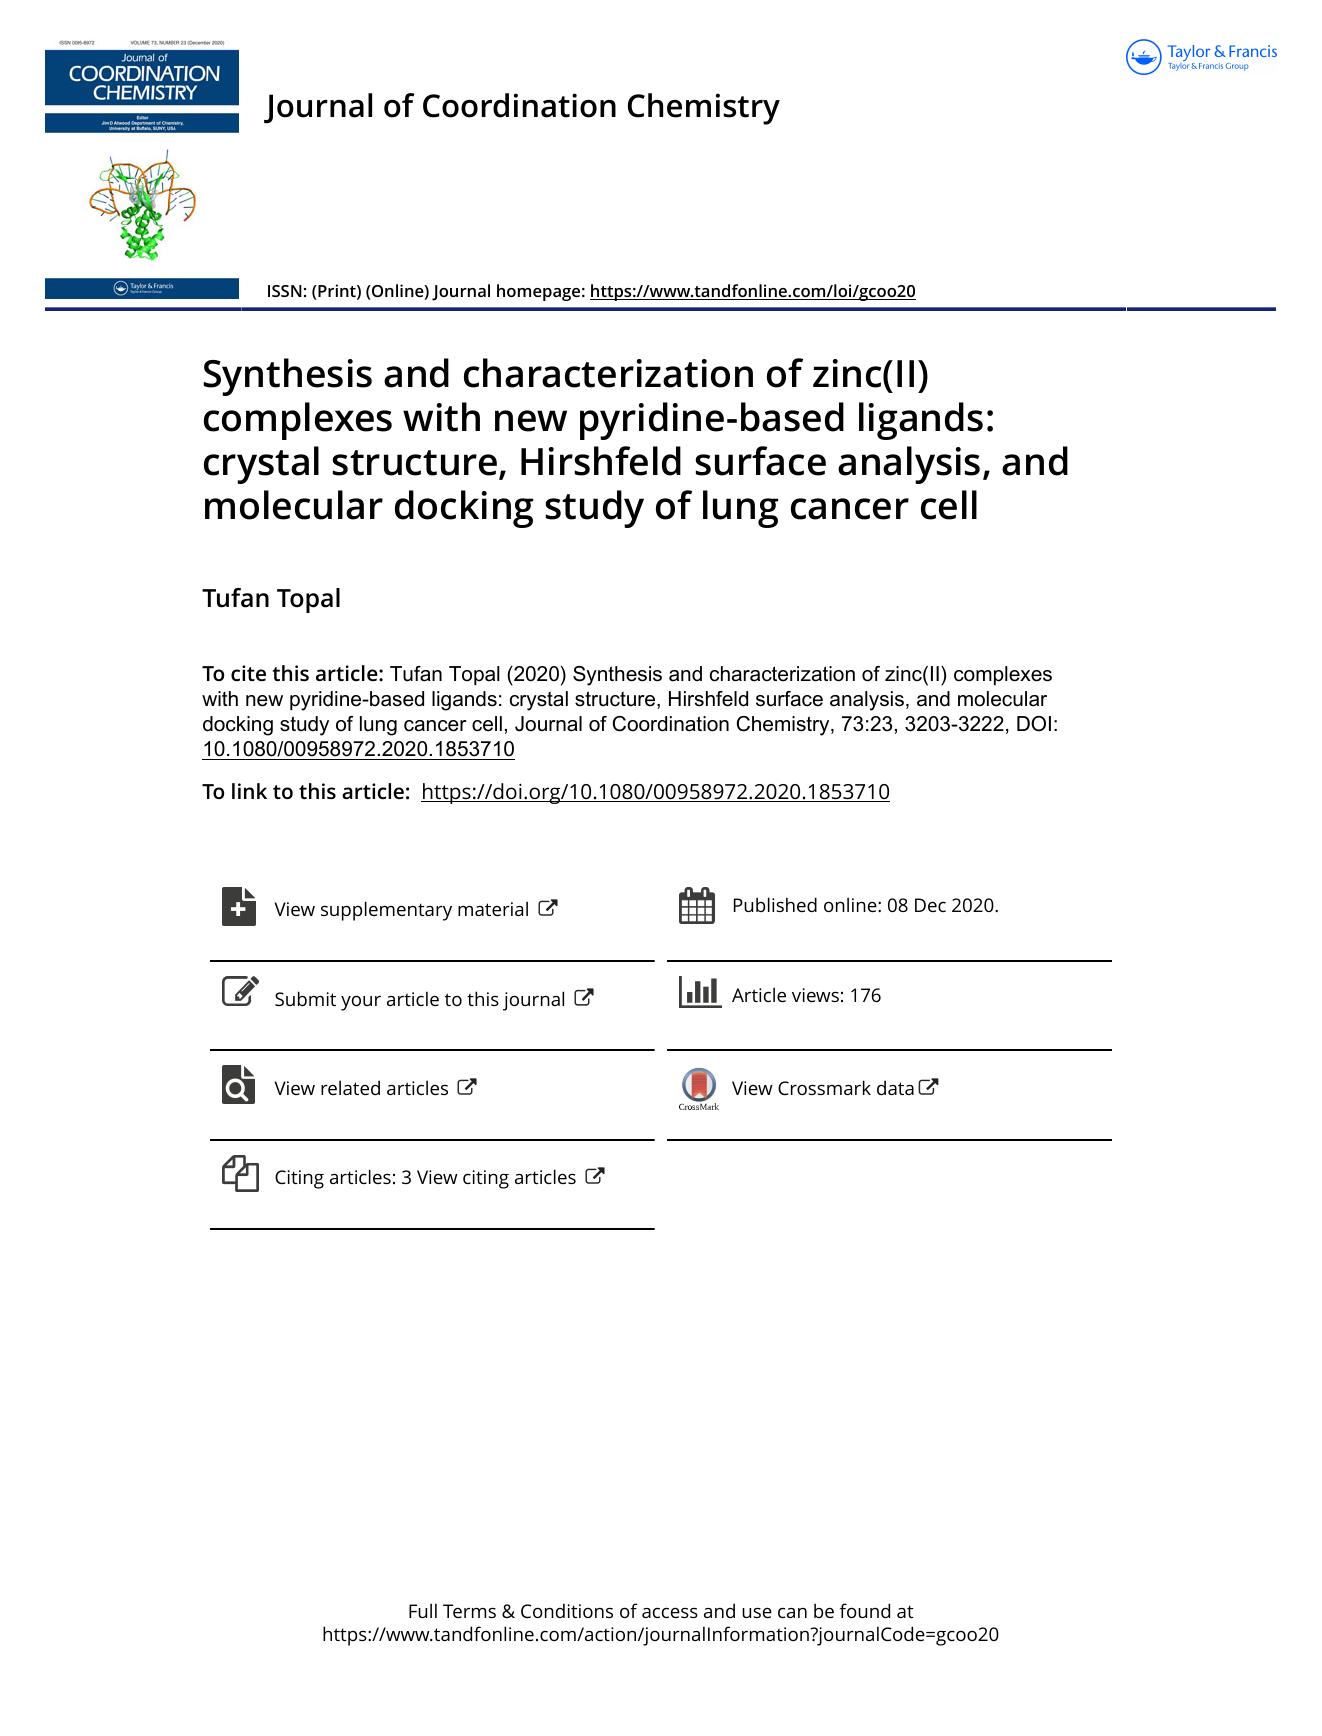 Synthesis and characterization of zinc(II) complexes with new pyridine-based ligands: crystal structure, Hirshfeld surface analysis, and molecular docking study of lung cancer cell by Topal Tufan